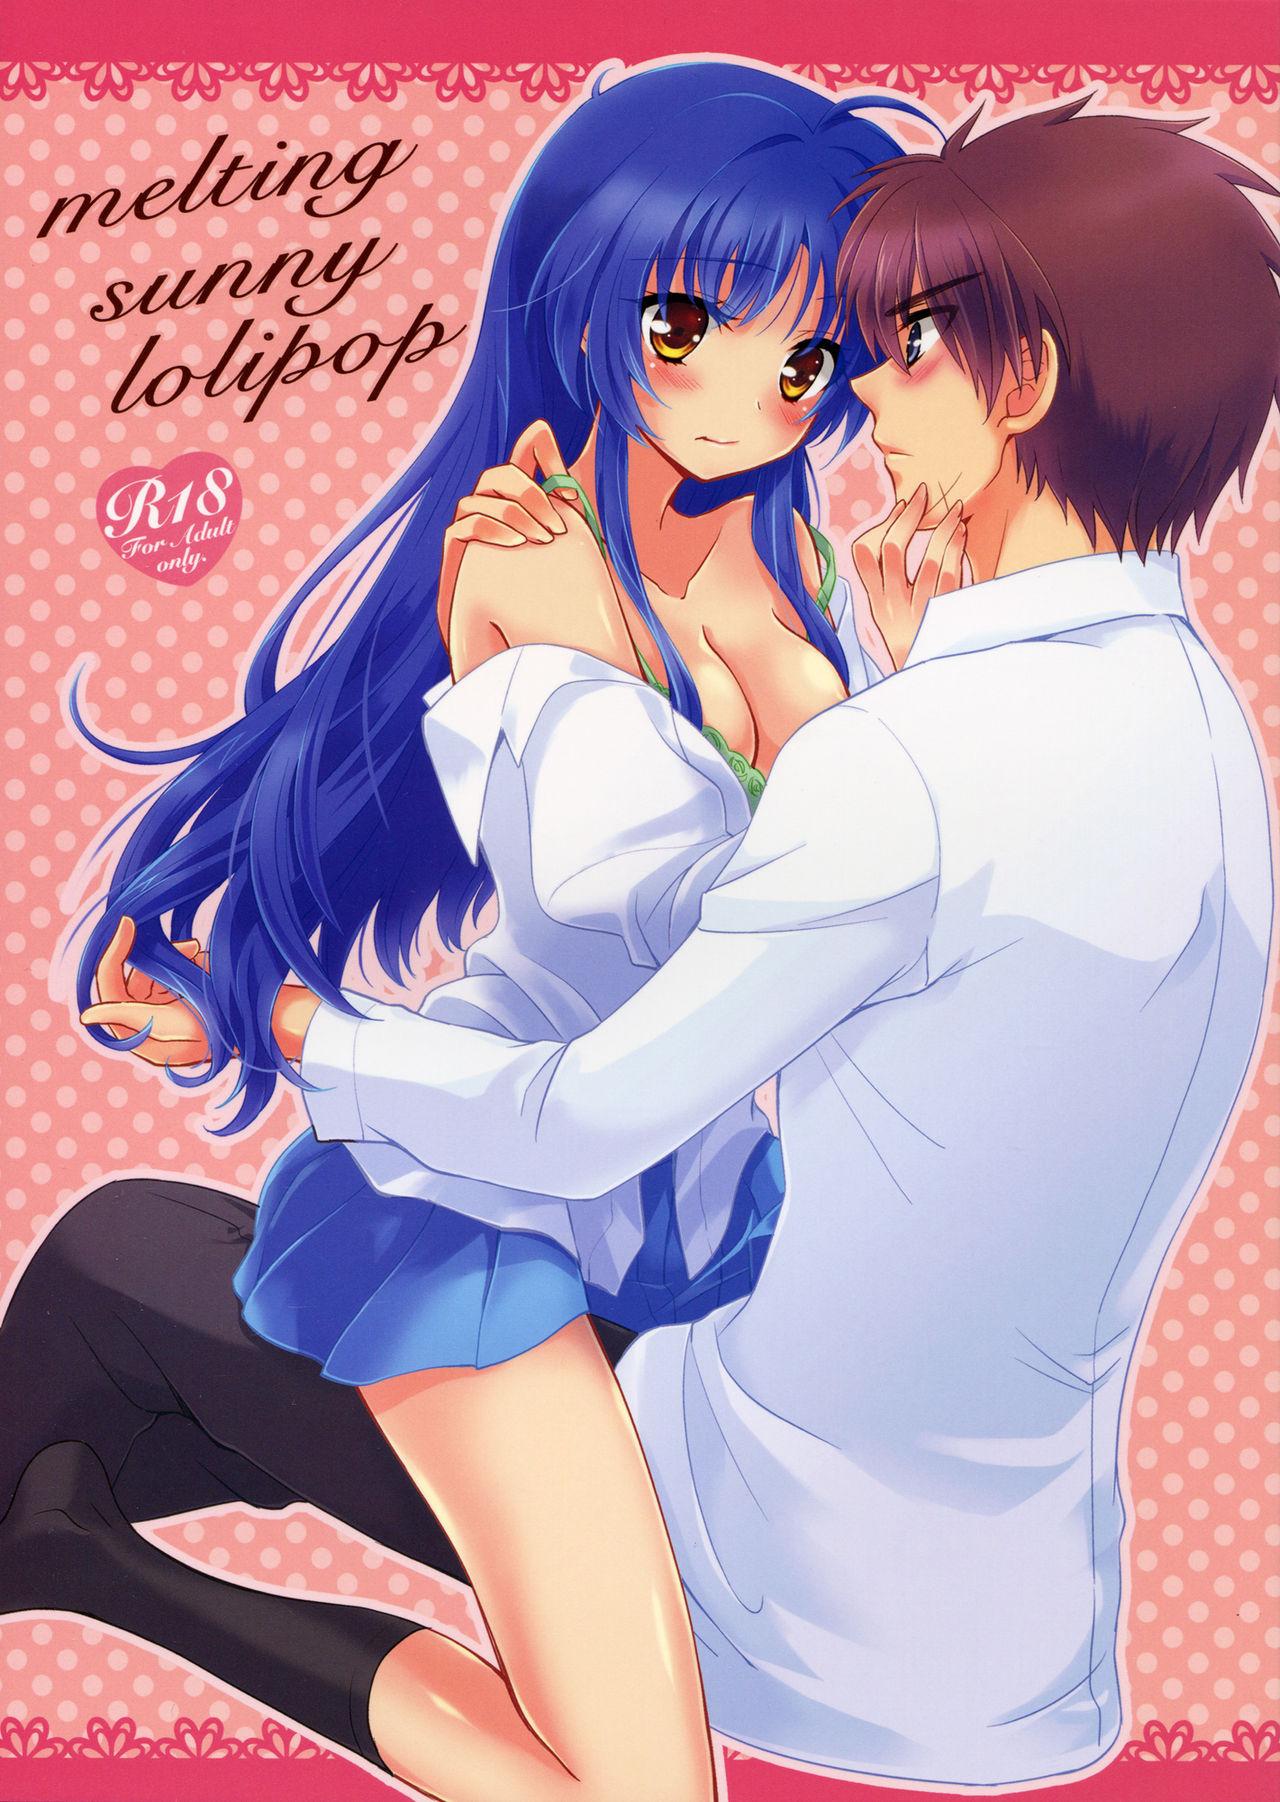 Amateur Sex Melting Sunny Lolipop - Full metal panic Gay - Picture 1